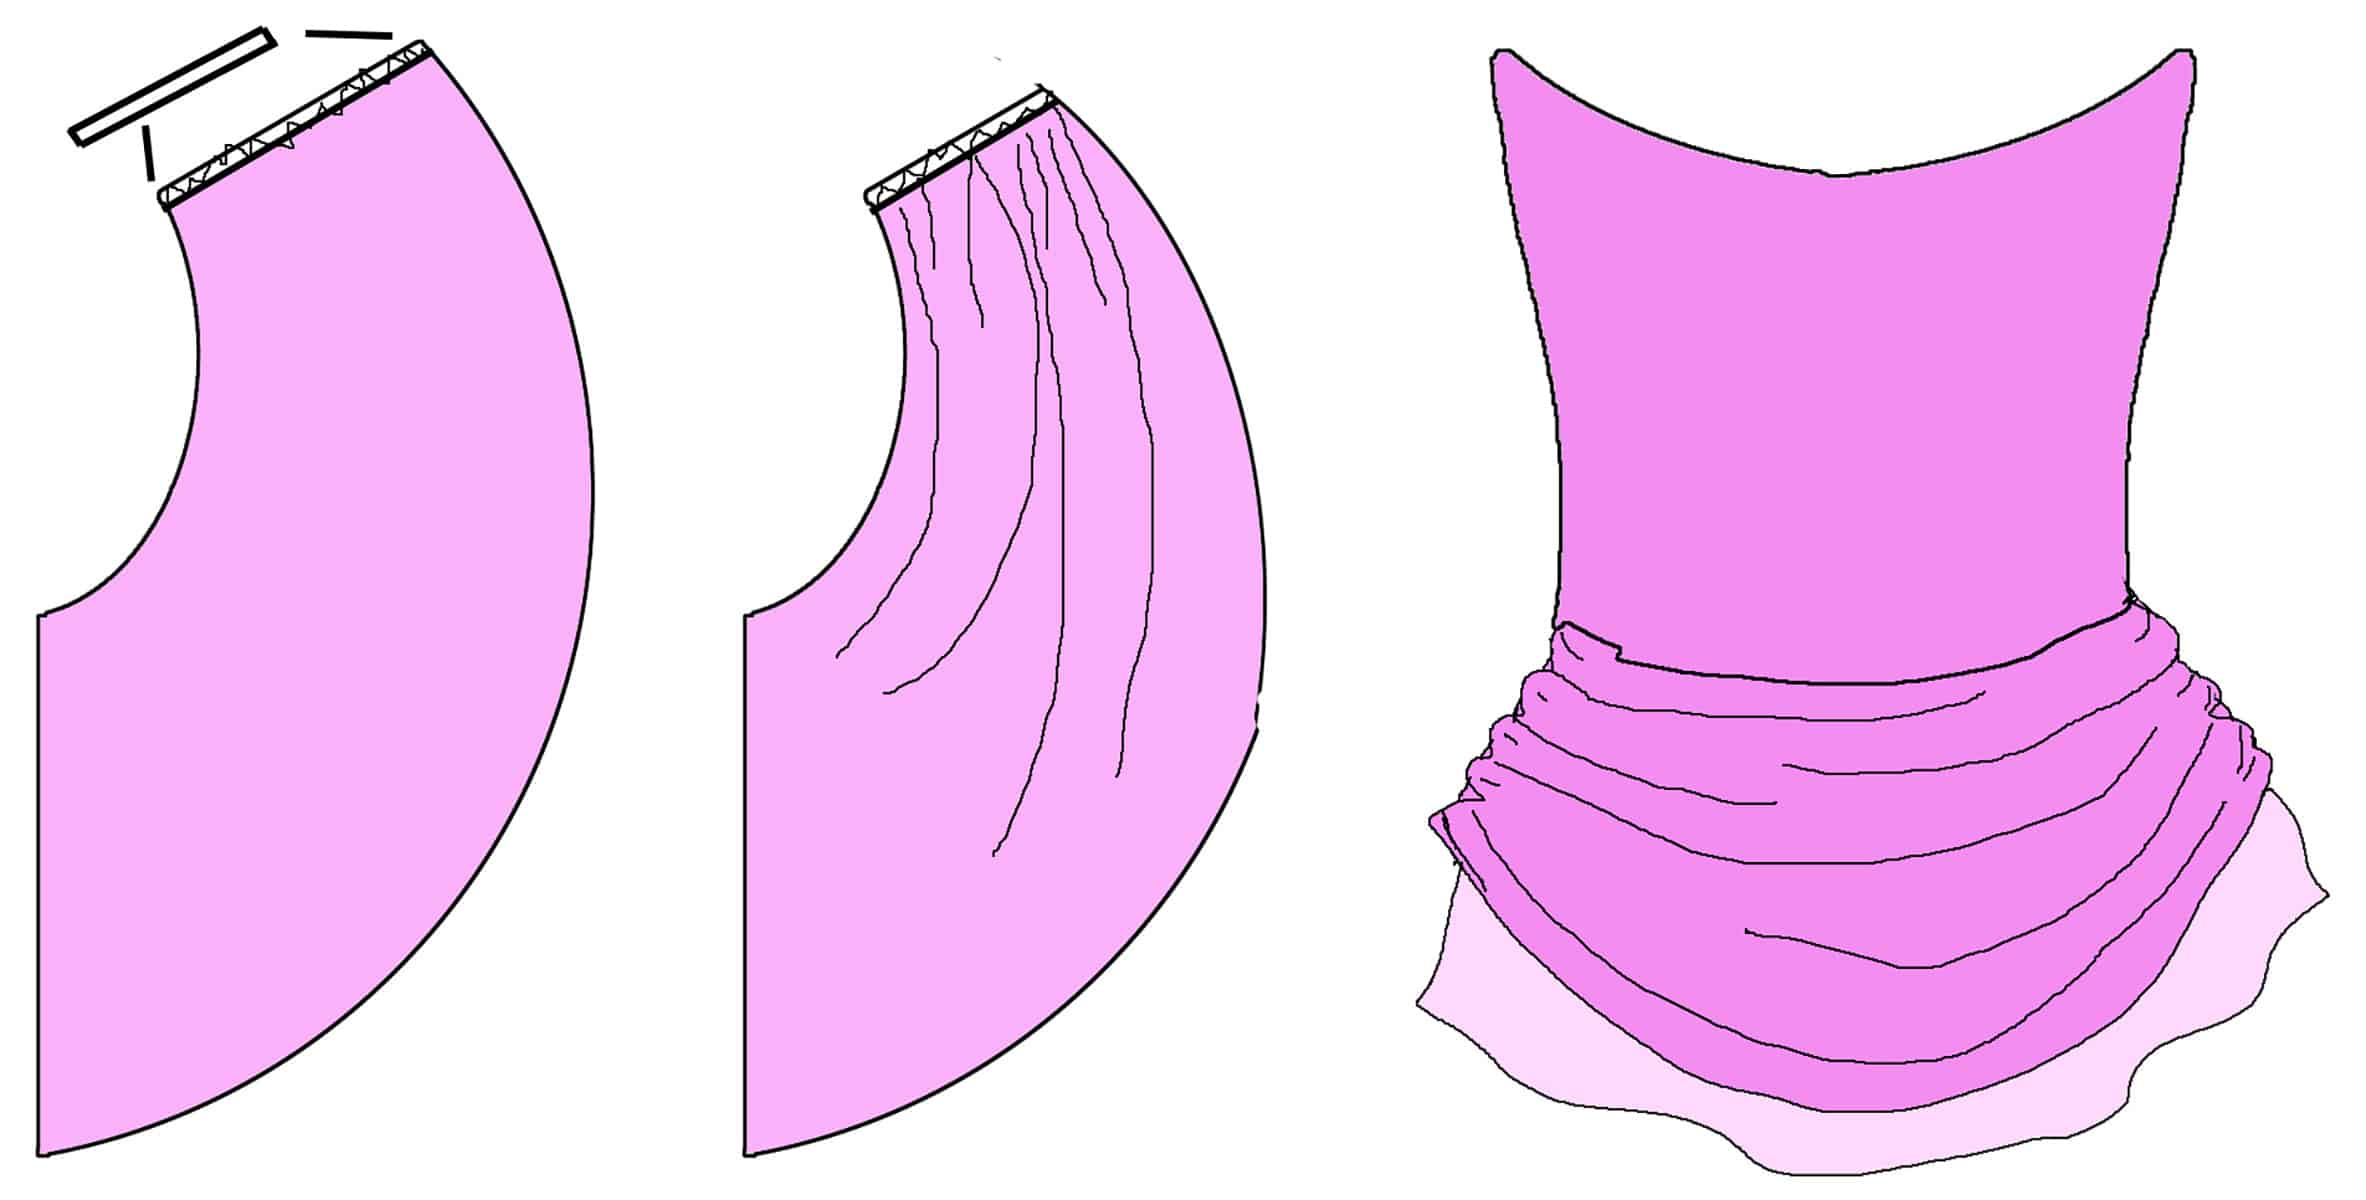 a 3 part sketch showing what a draped skirt pattern looks like, as described in the post.